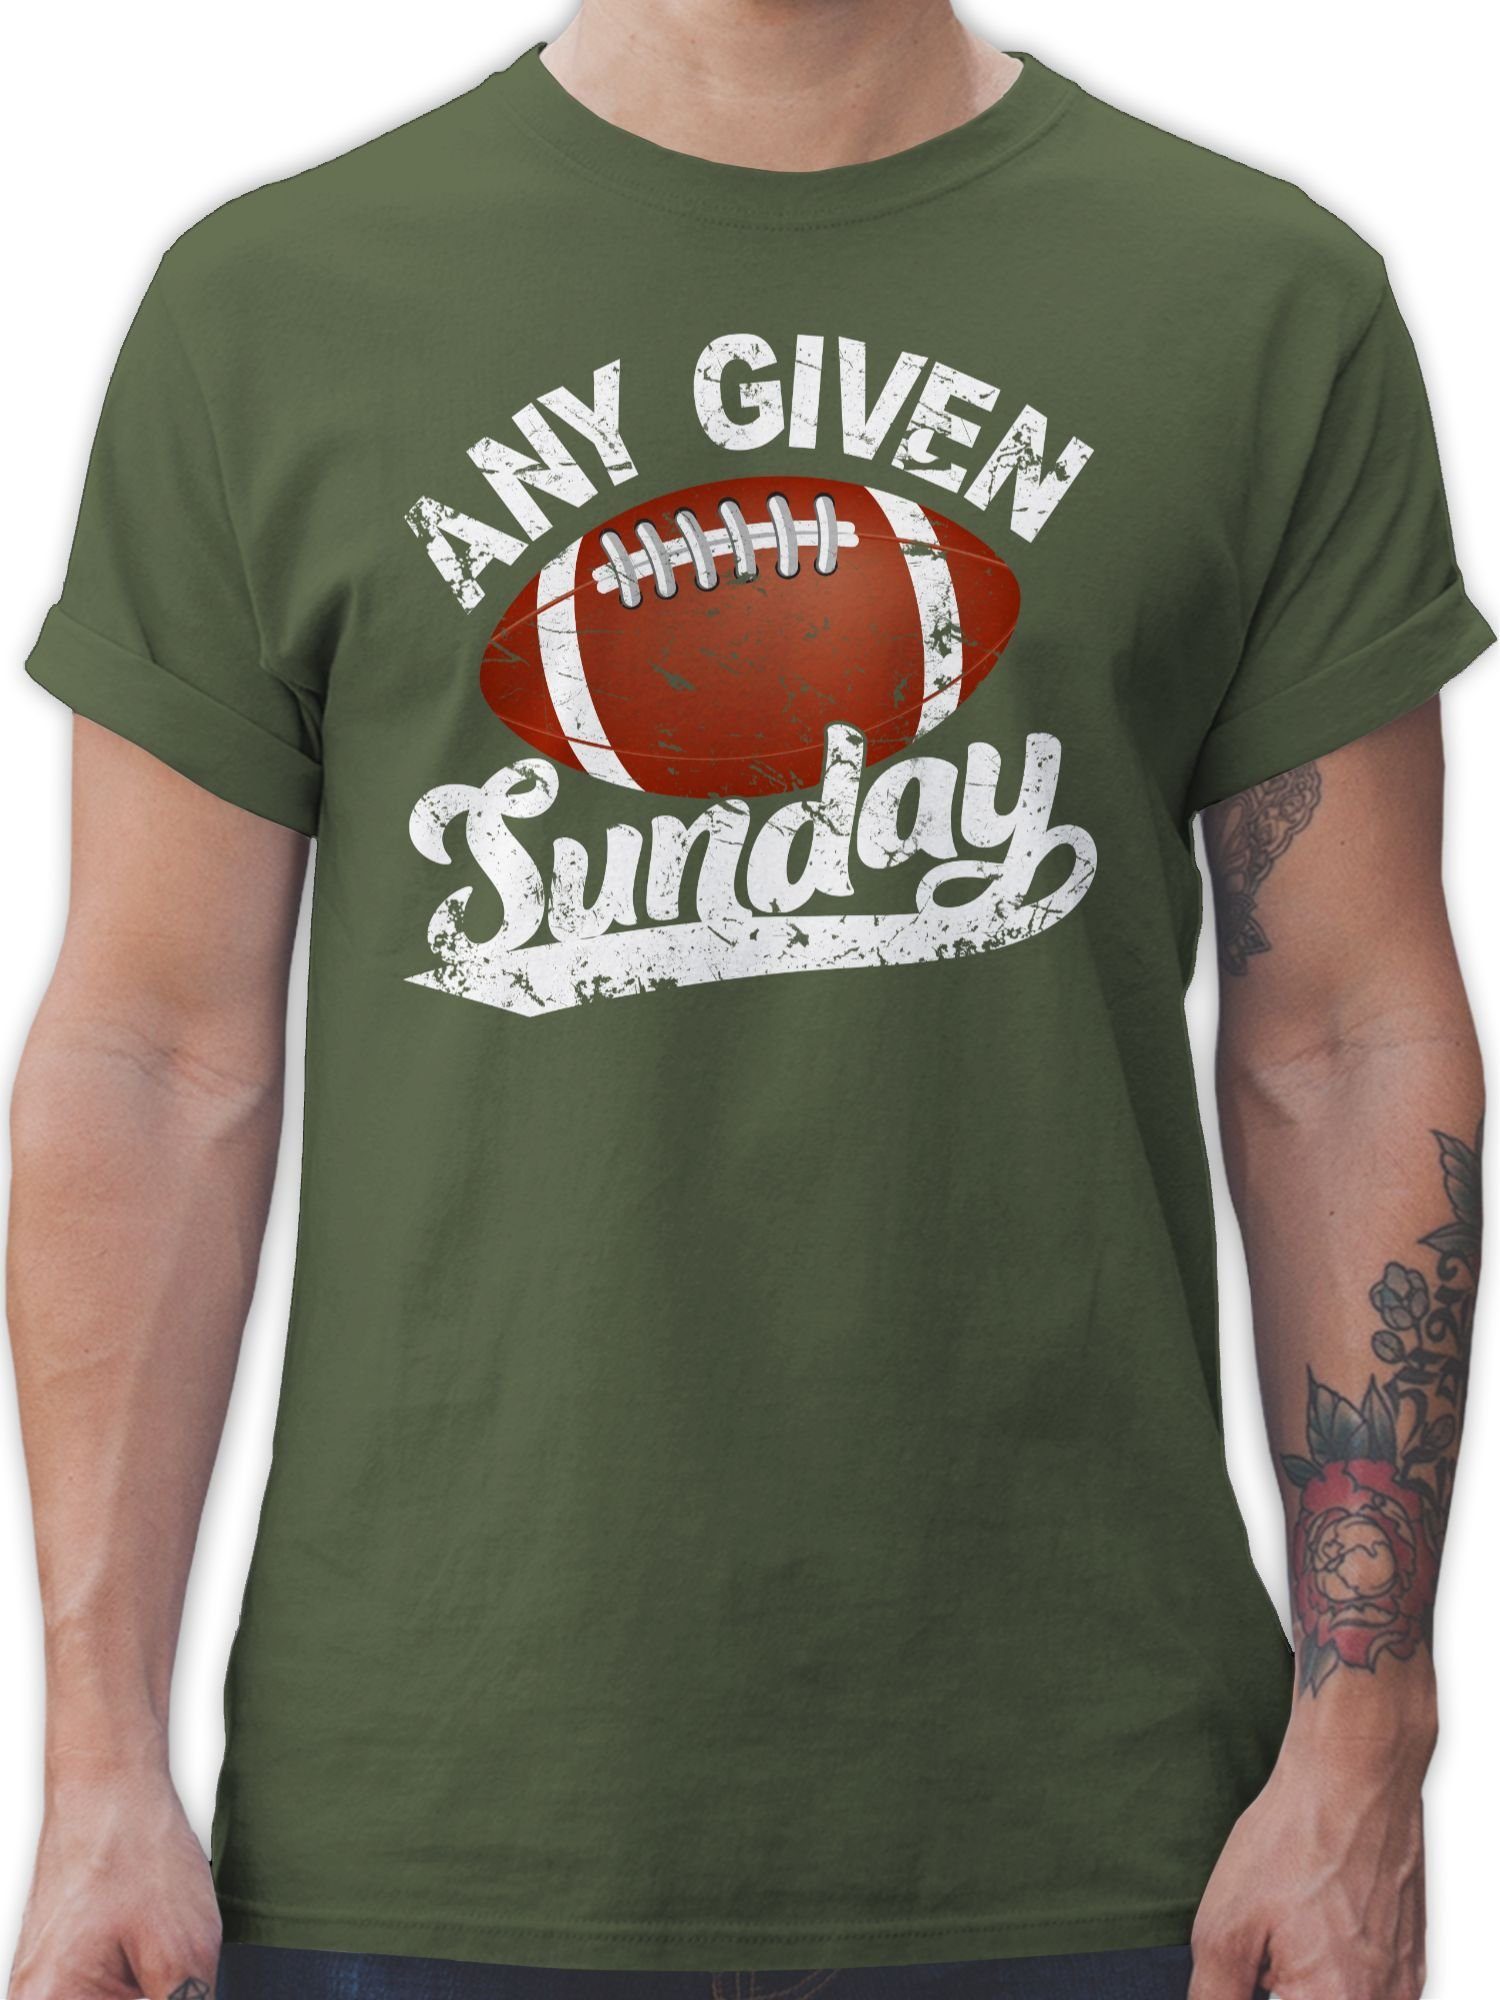 Shirtracer T-Shirt Any given Sunday mit Football weiß American Football NFL